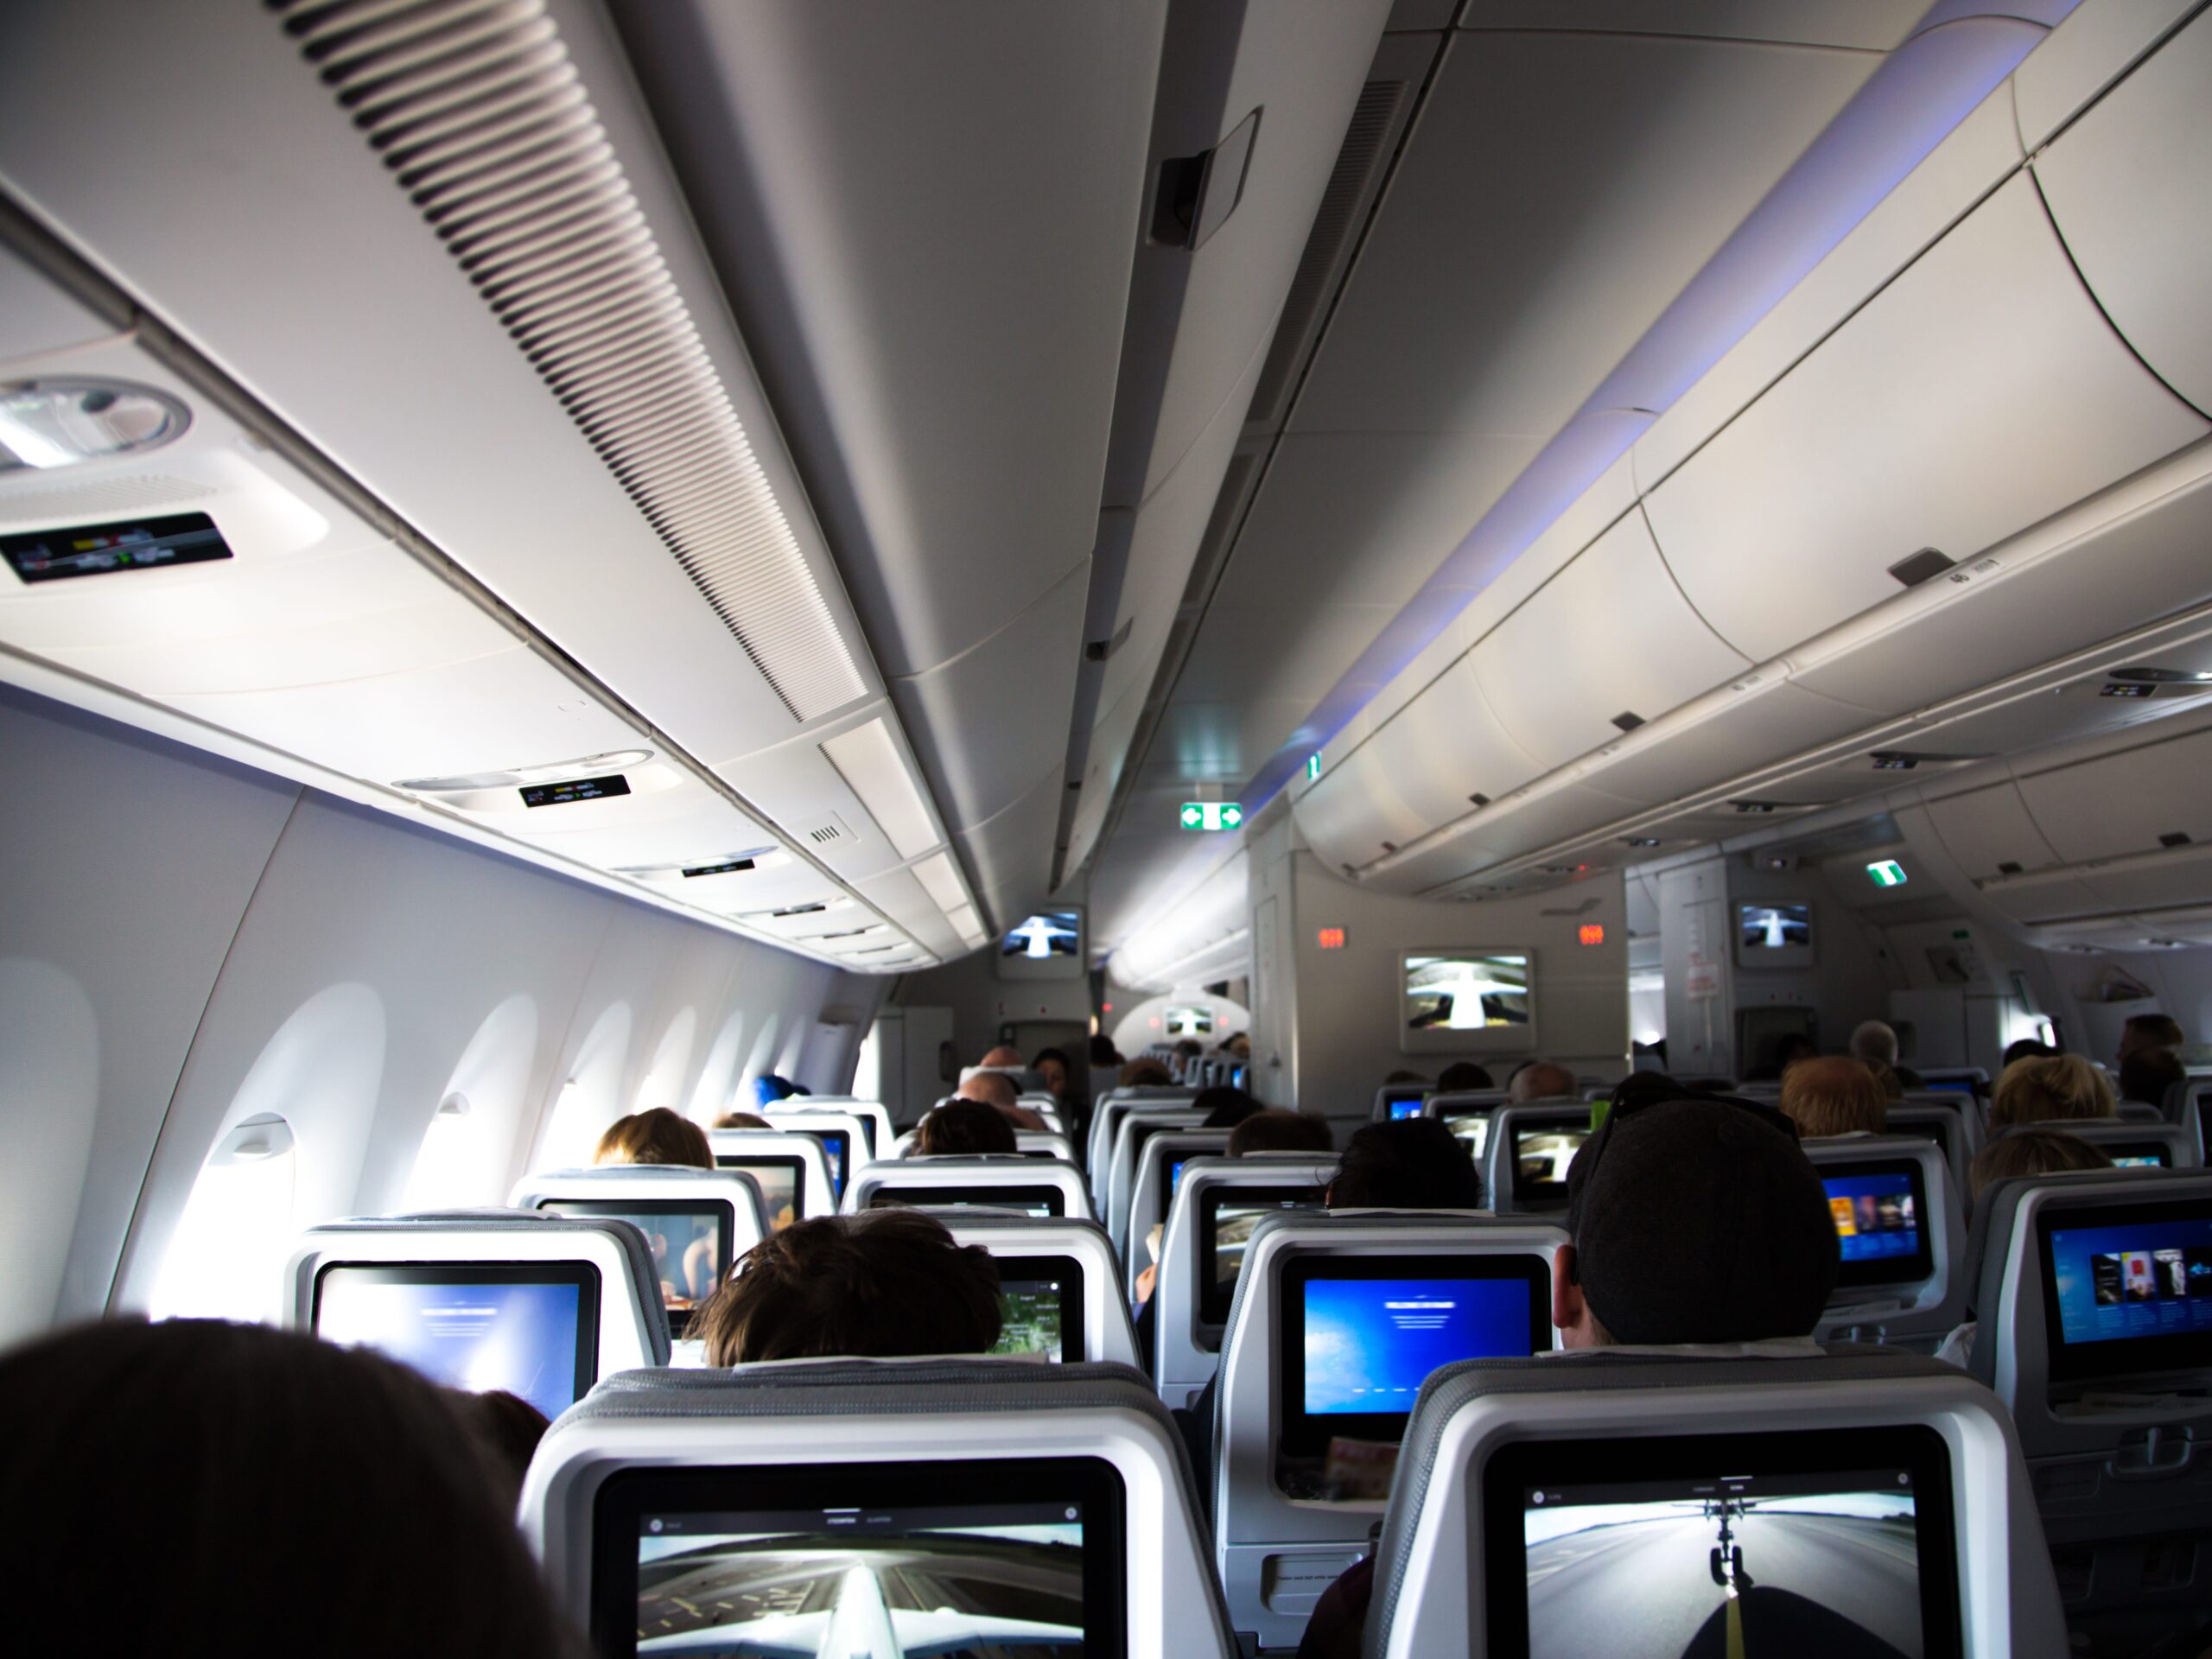 Inside of a long distance new airplane with passengers sitting and resting during a long flight with picture taken from the back of the airplane